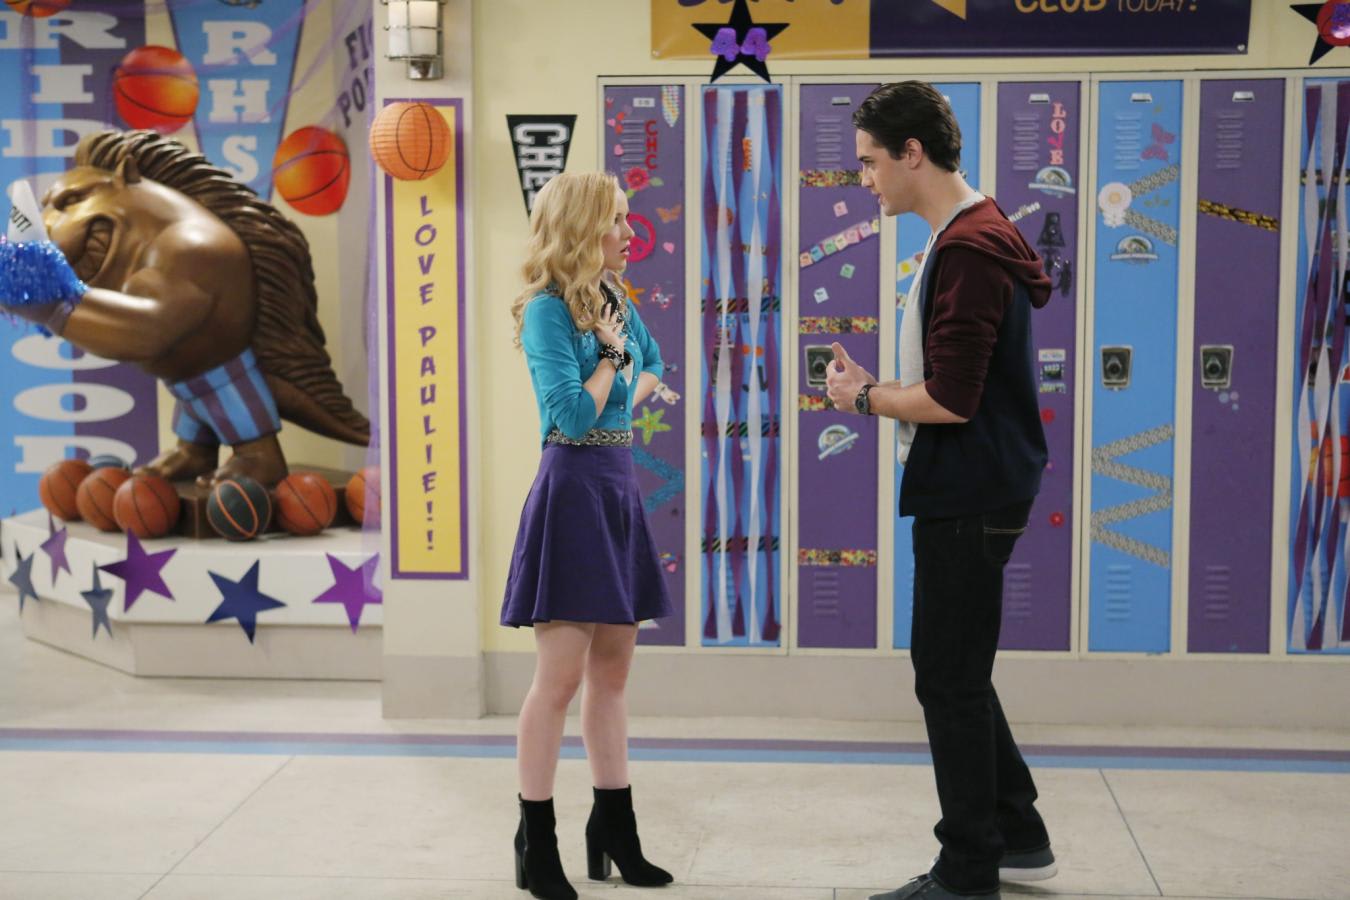 Liv and maddie thanksgiving episode